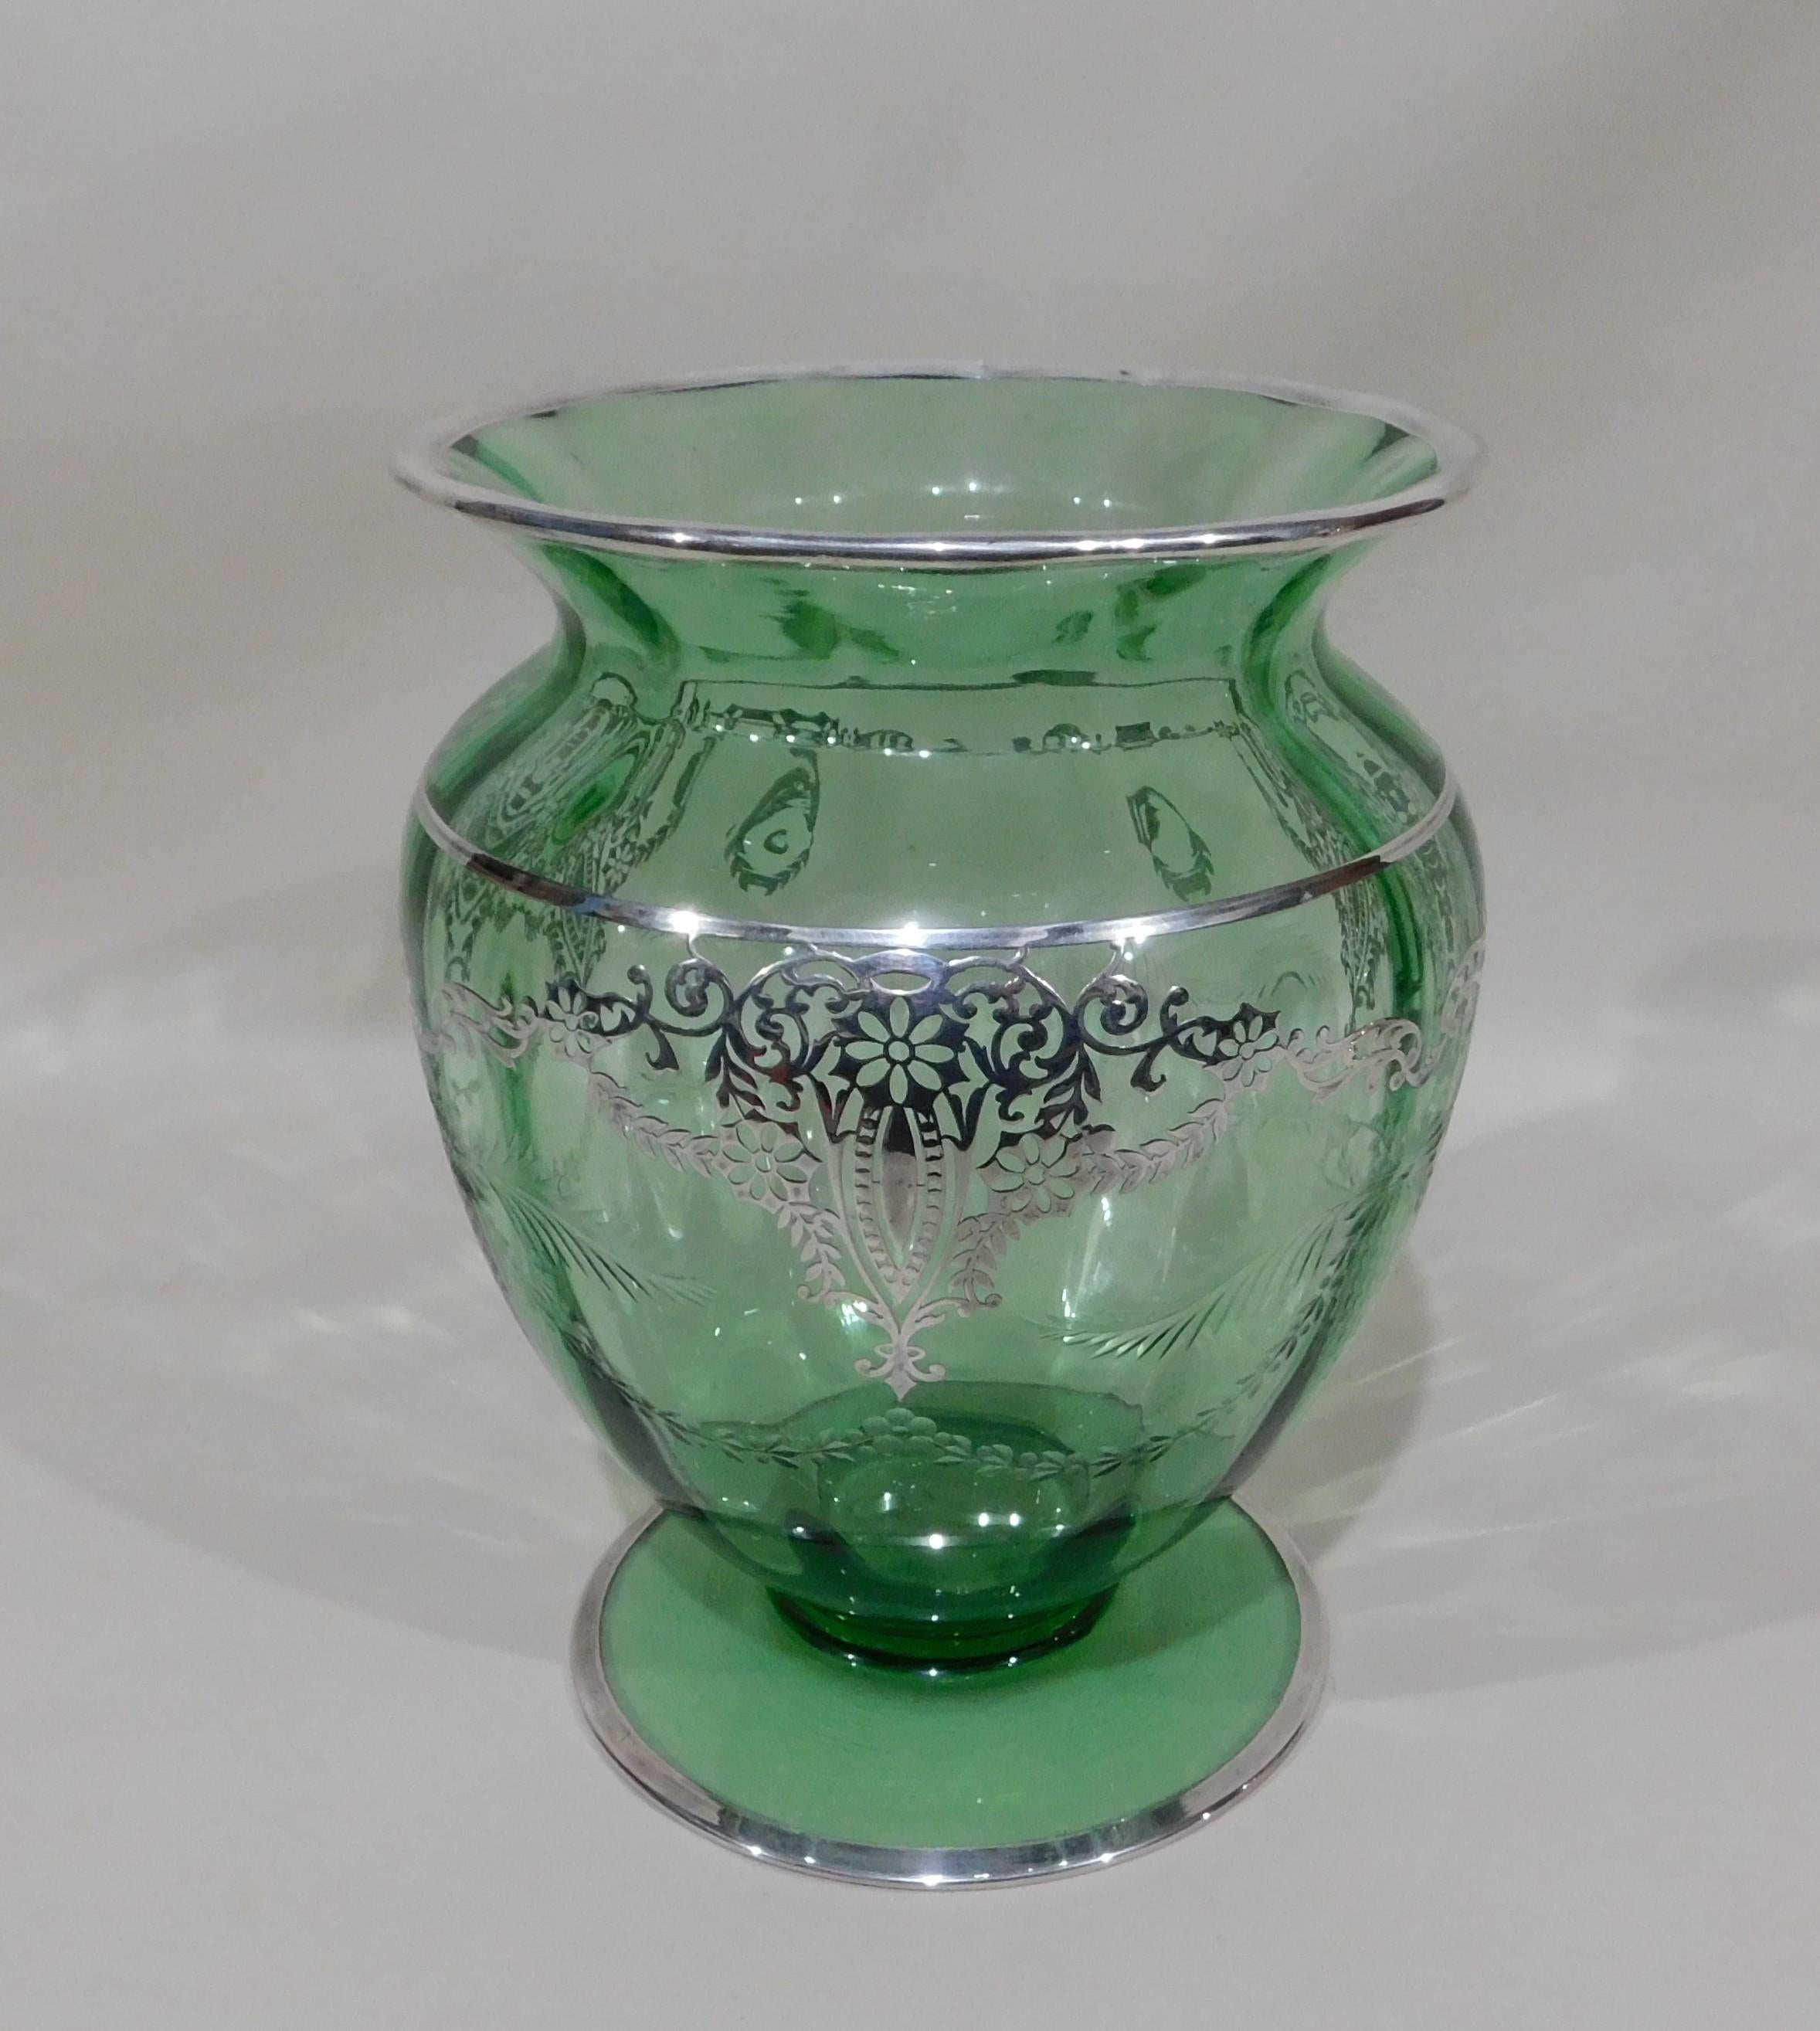 Early 20th century sterling silver emerald green glass vase.